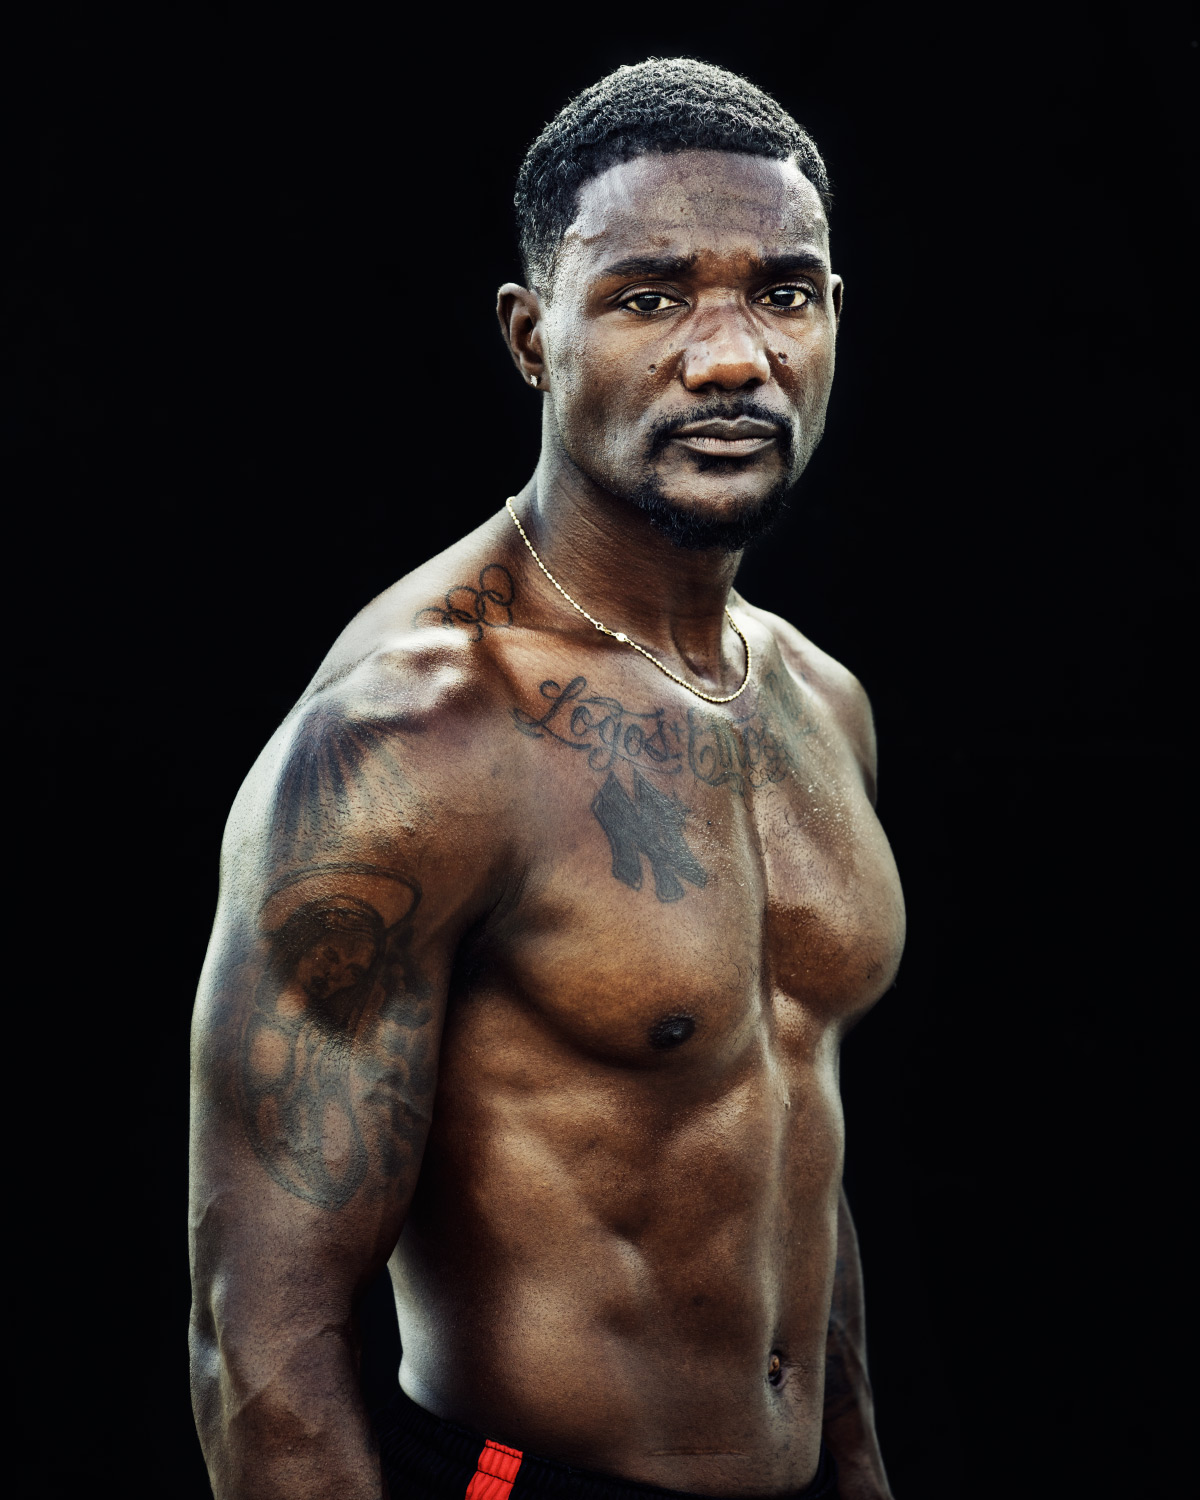 Gold Medalist sprinter Justin Gatlin poses for a portrait at Montverde Academy in Montverde, FL on Friday, July 22, 2016. Gatlin races Usain Bolt in the 100 meter on August 14.